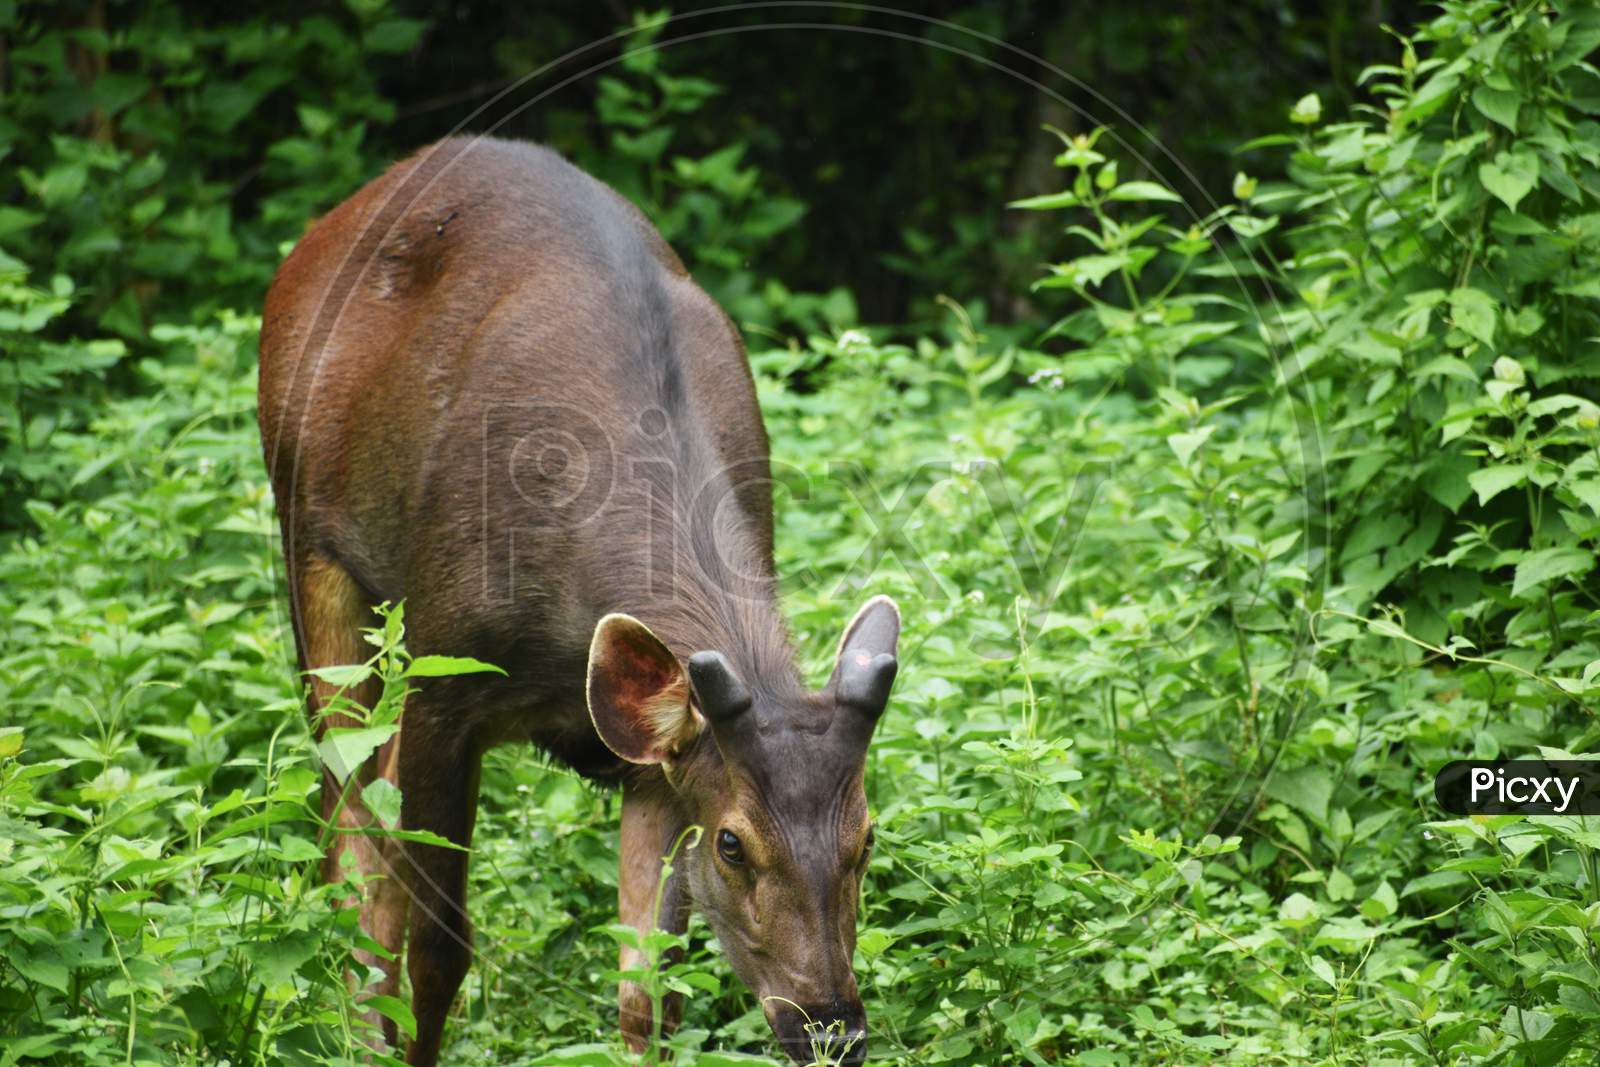 A Deer Is Eating Green Plants And Leaves In The Jungle